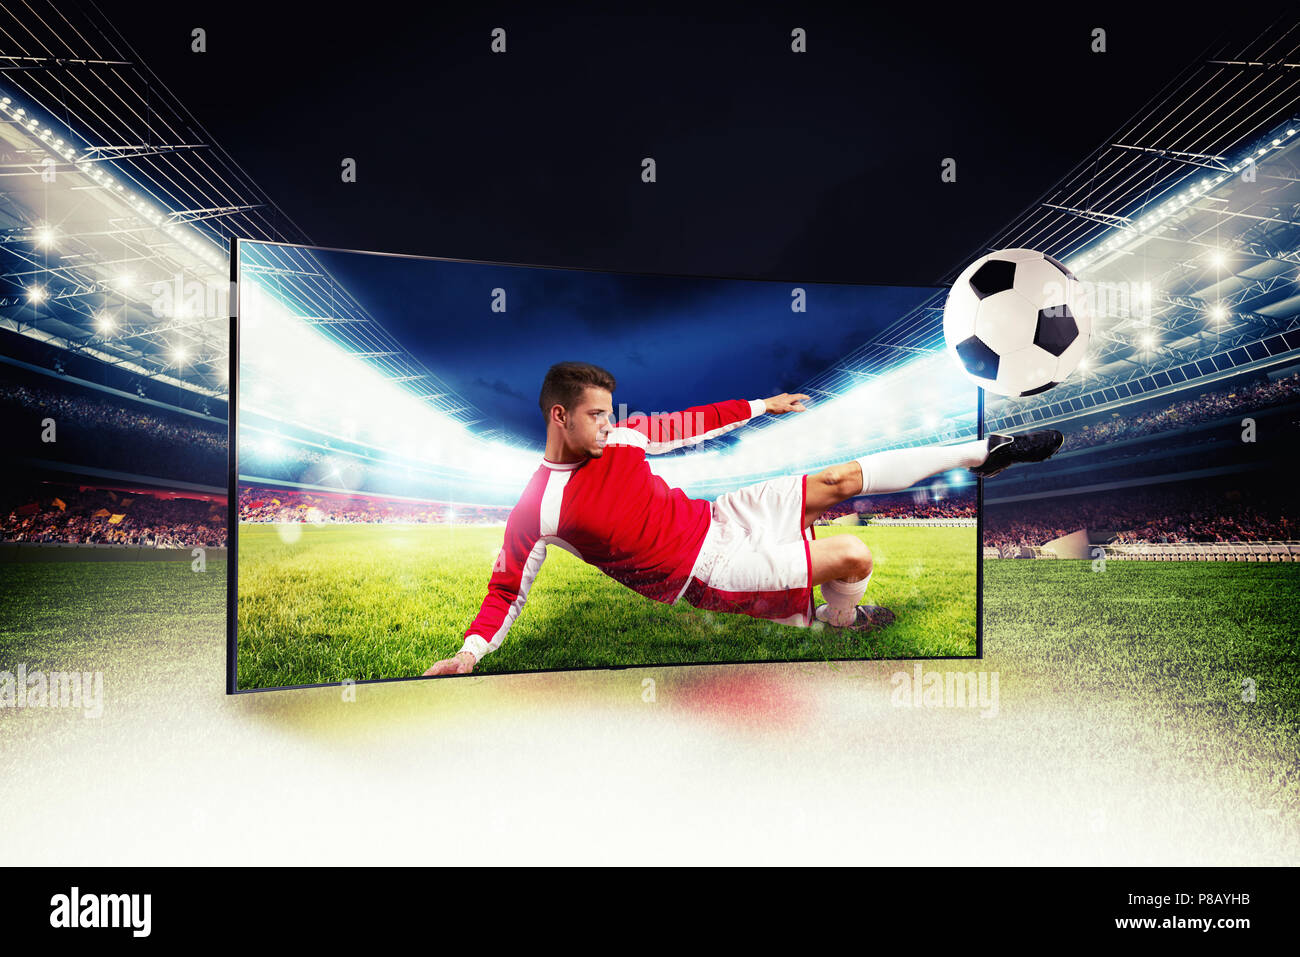 Realism of sporting images broadcast on high definition television Stock Photo